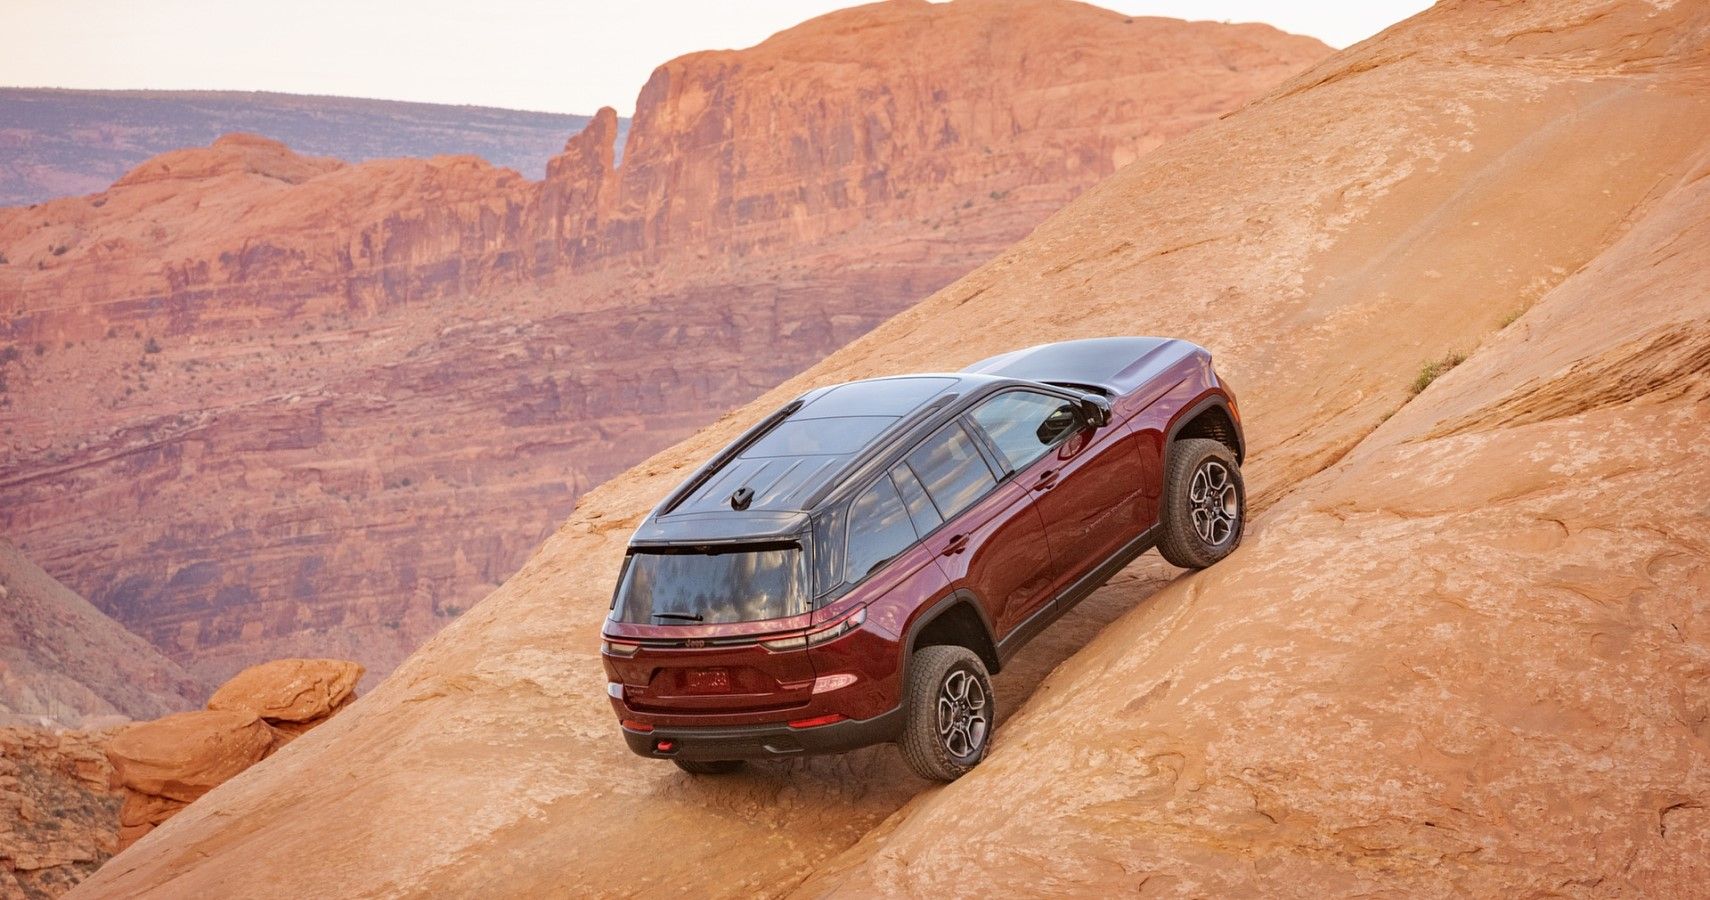 2022 Jeep Grand Cherokee Trailhawk showing its off-roading appeal